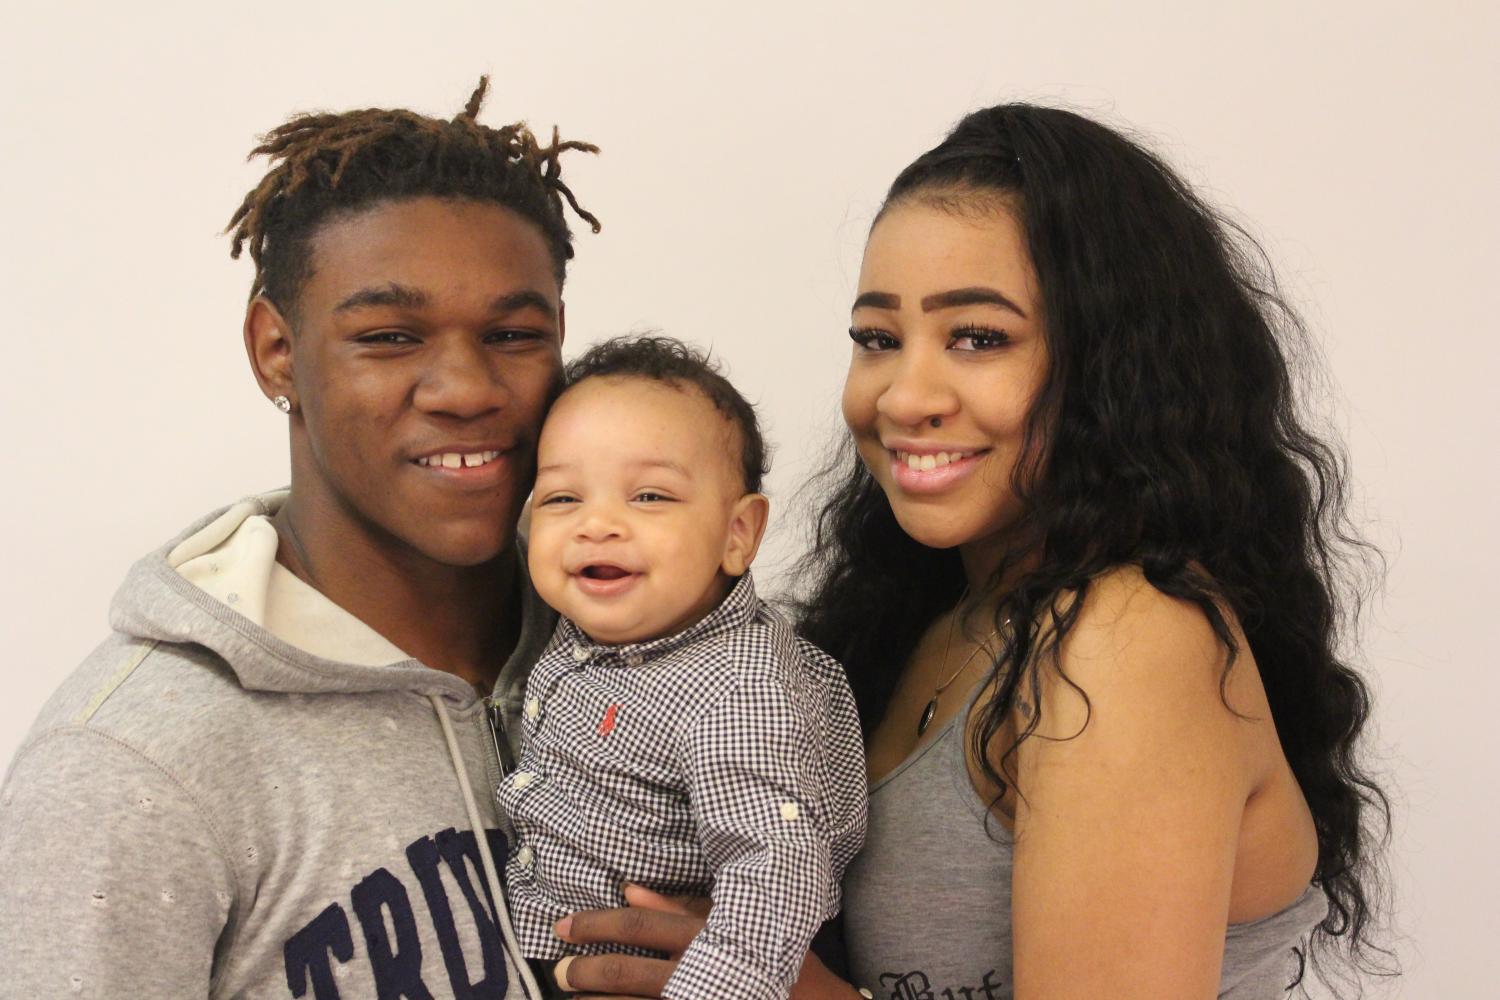 From left to right: Donnell, Donnell Jr. and India smile for the camera